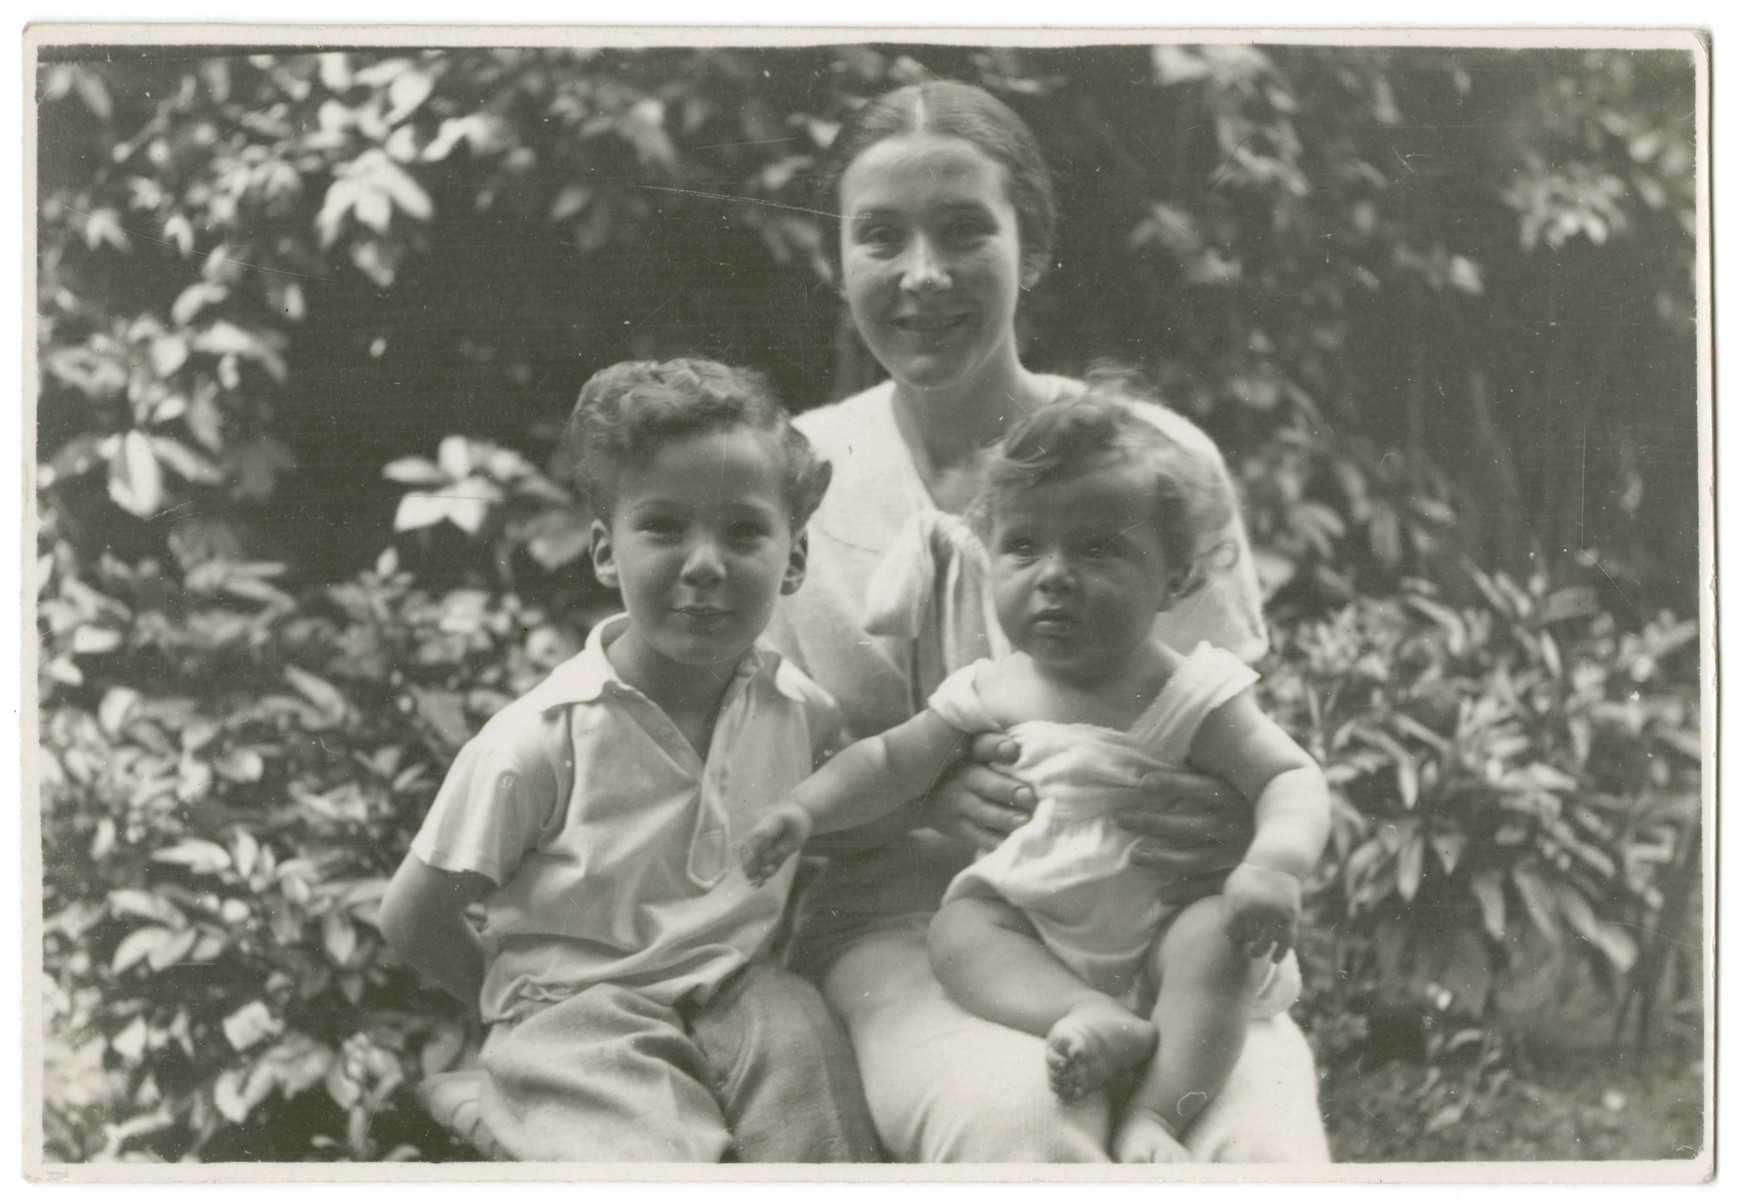 Vilma Grunwald poses with her two sons, John and Misa.